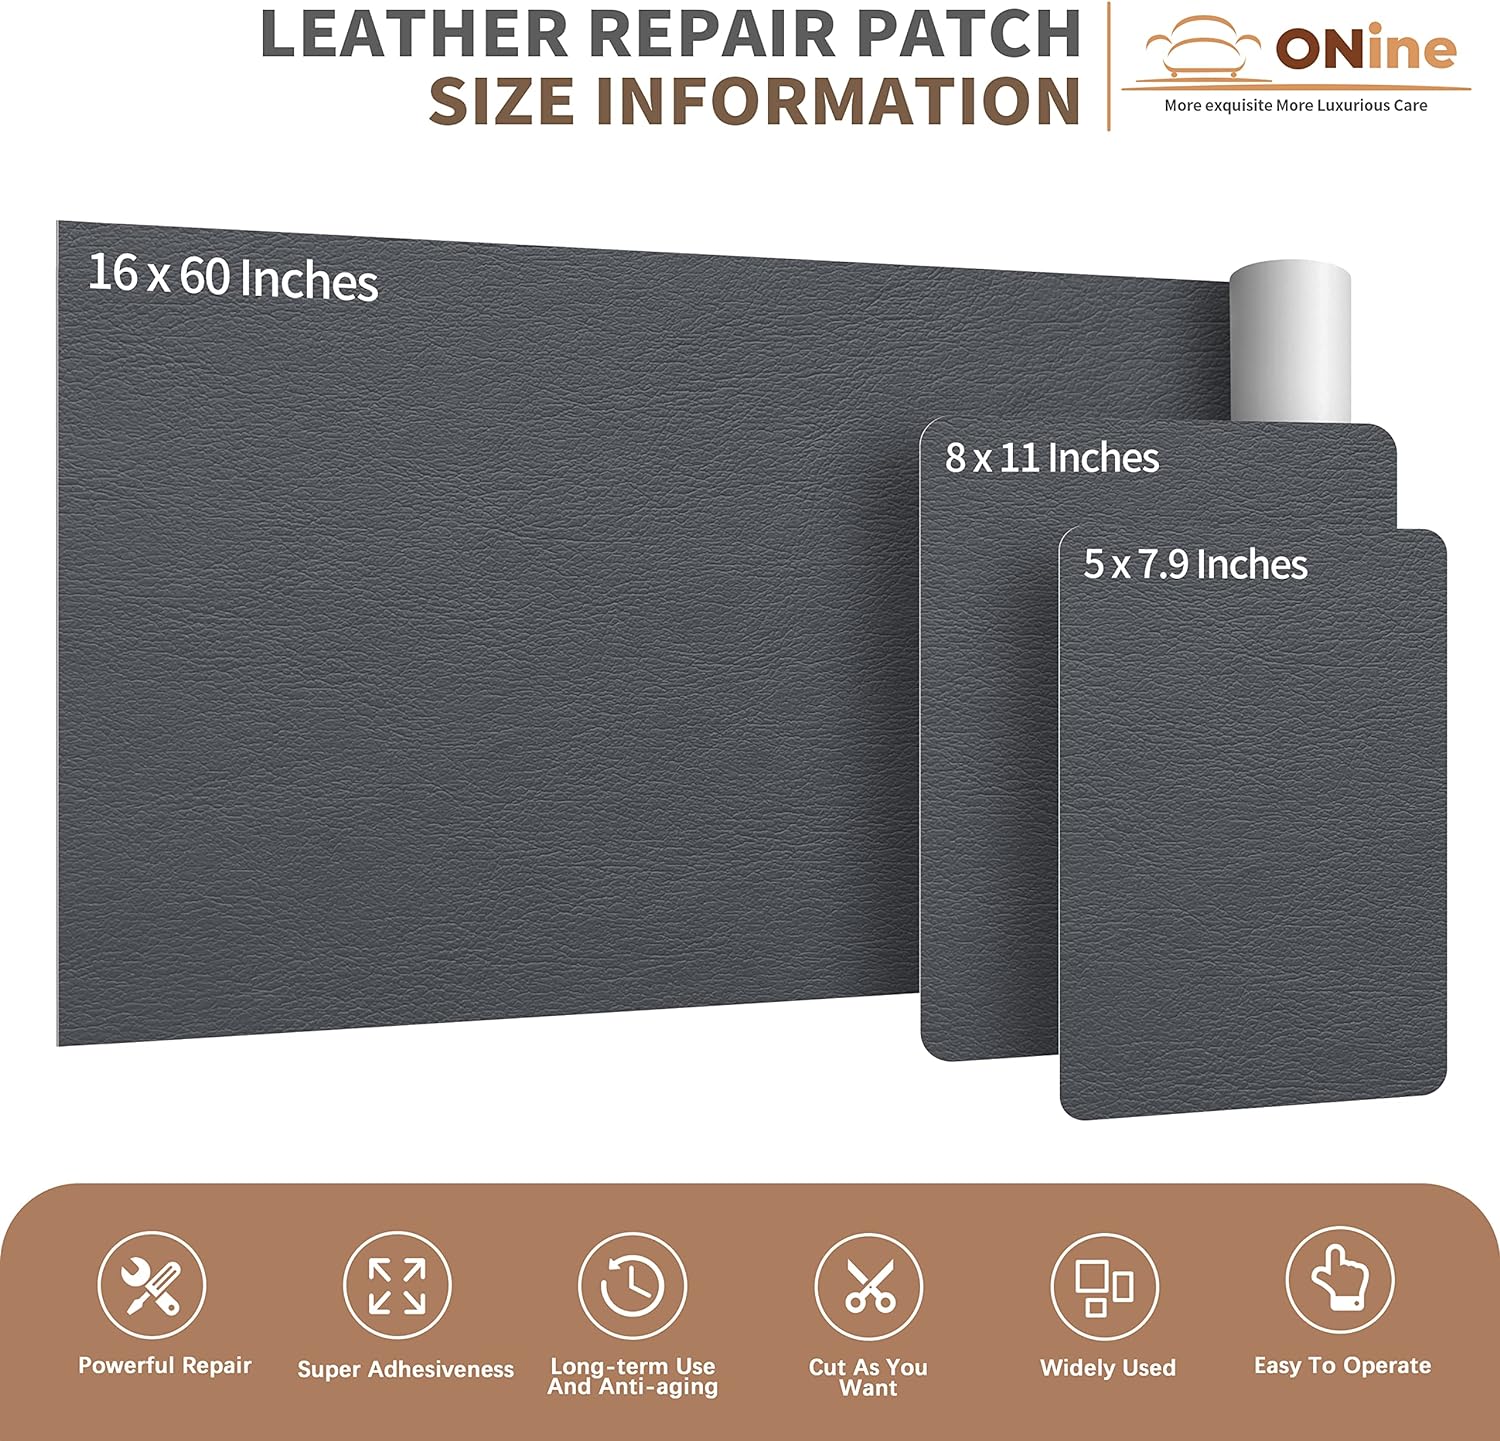 ONine Leather Repair Patch，Self-Adhesive Couch Patch，Multicolor